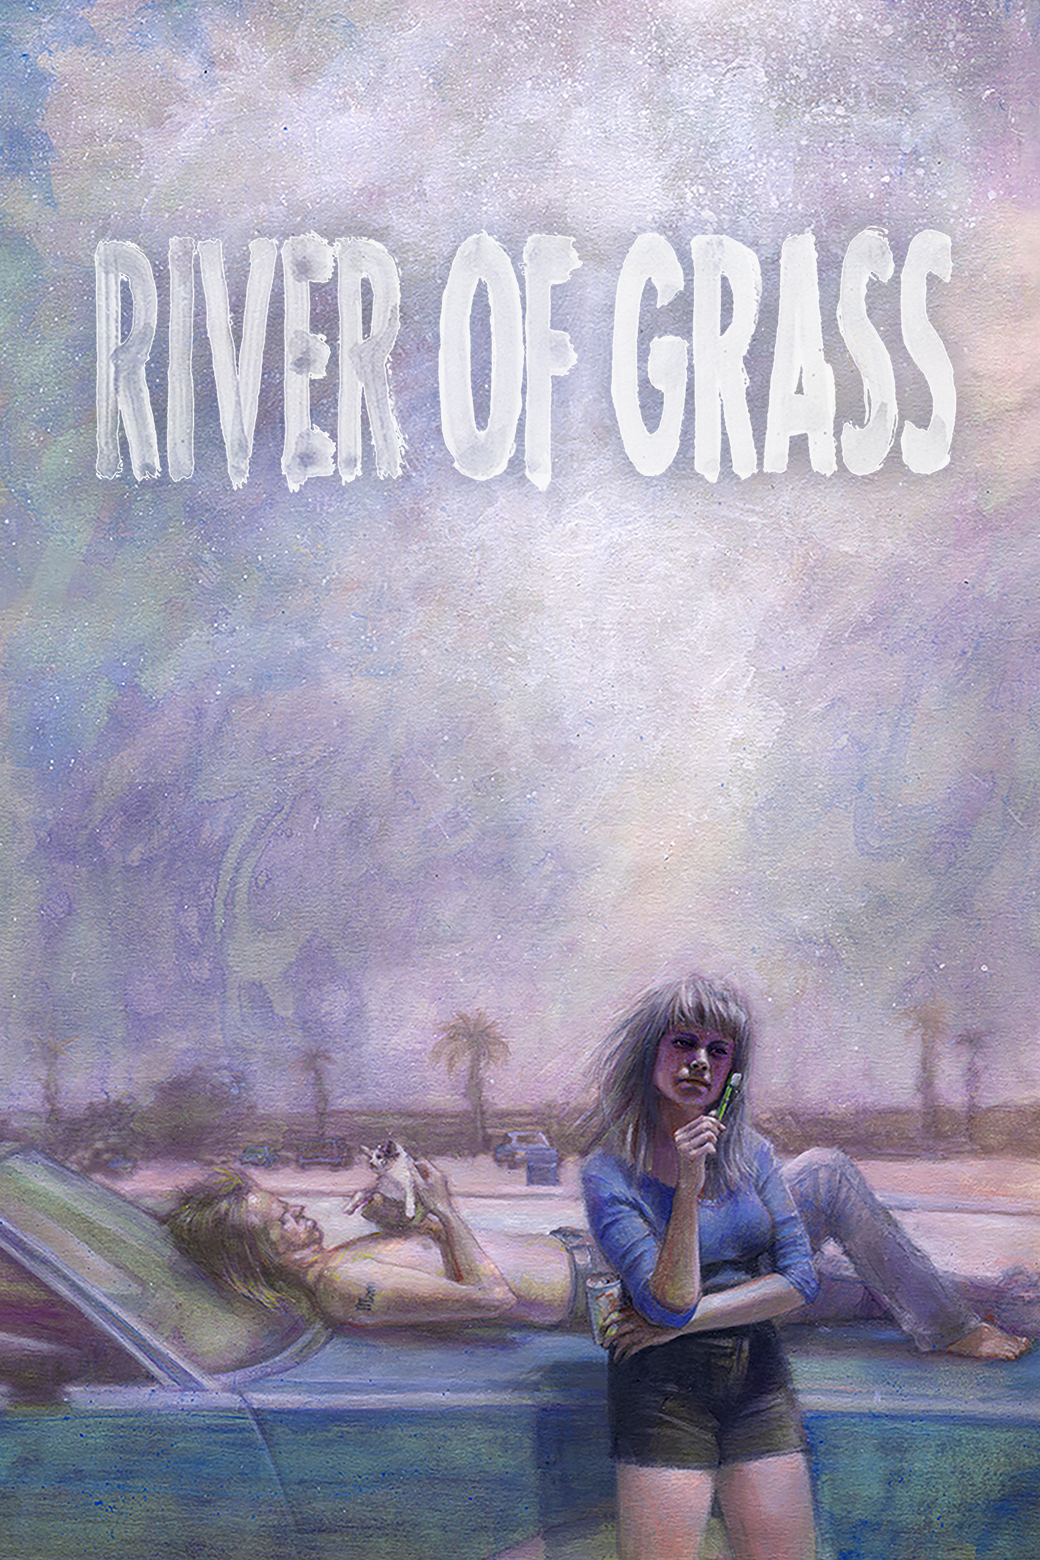 River of Grass